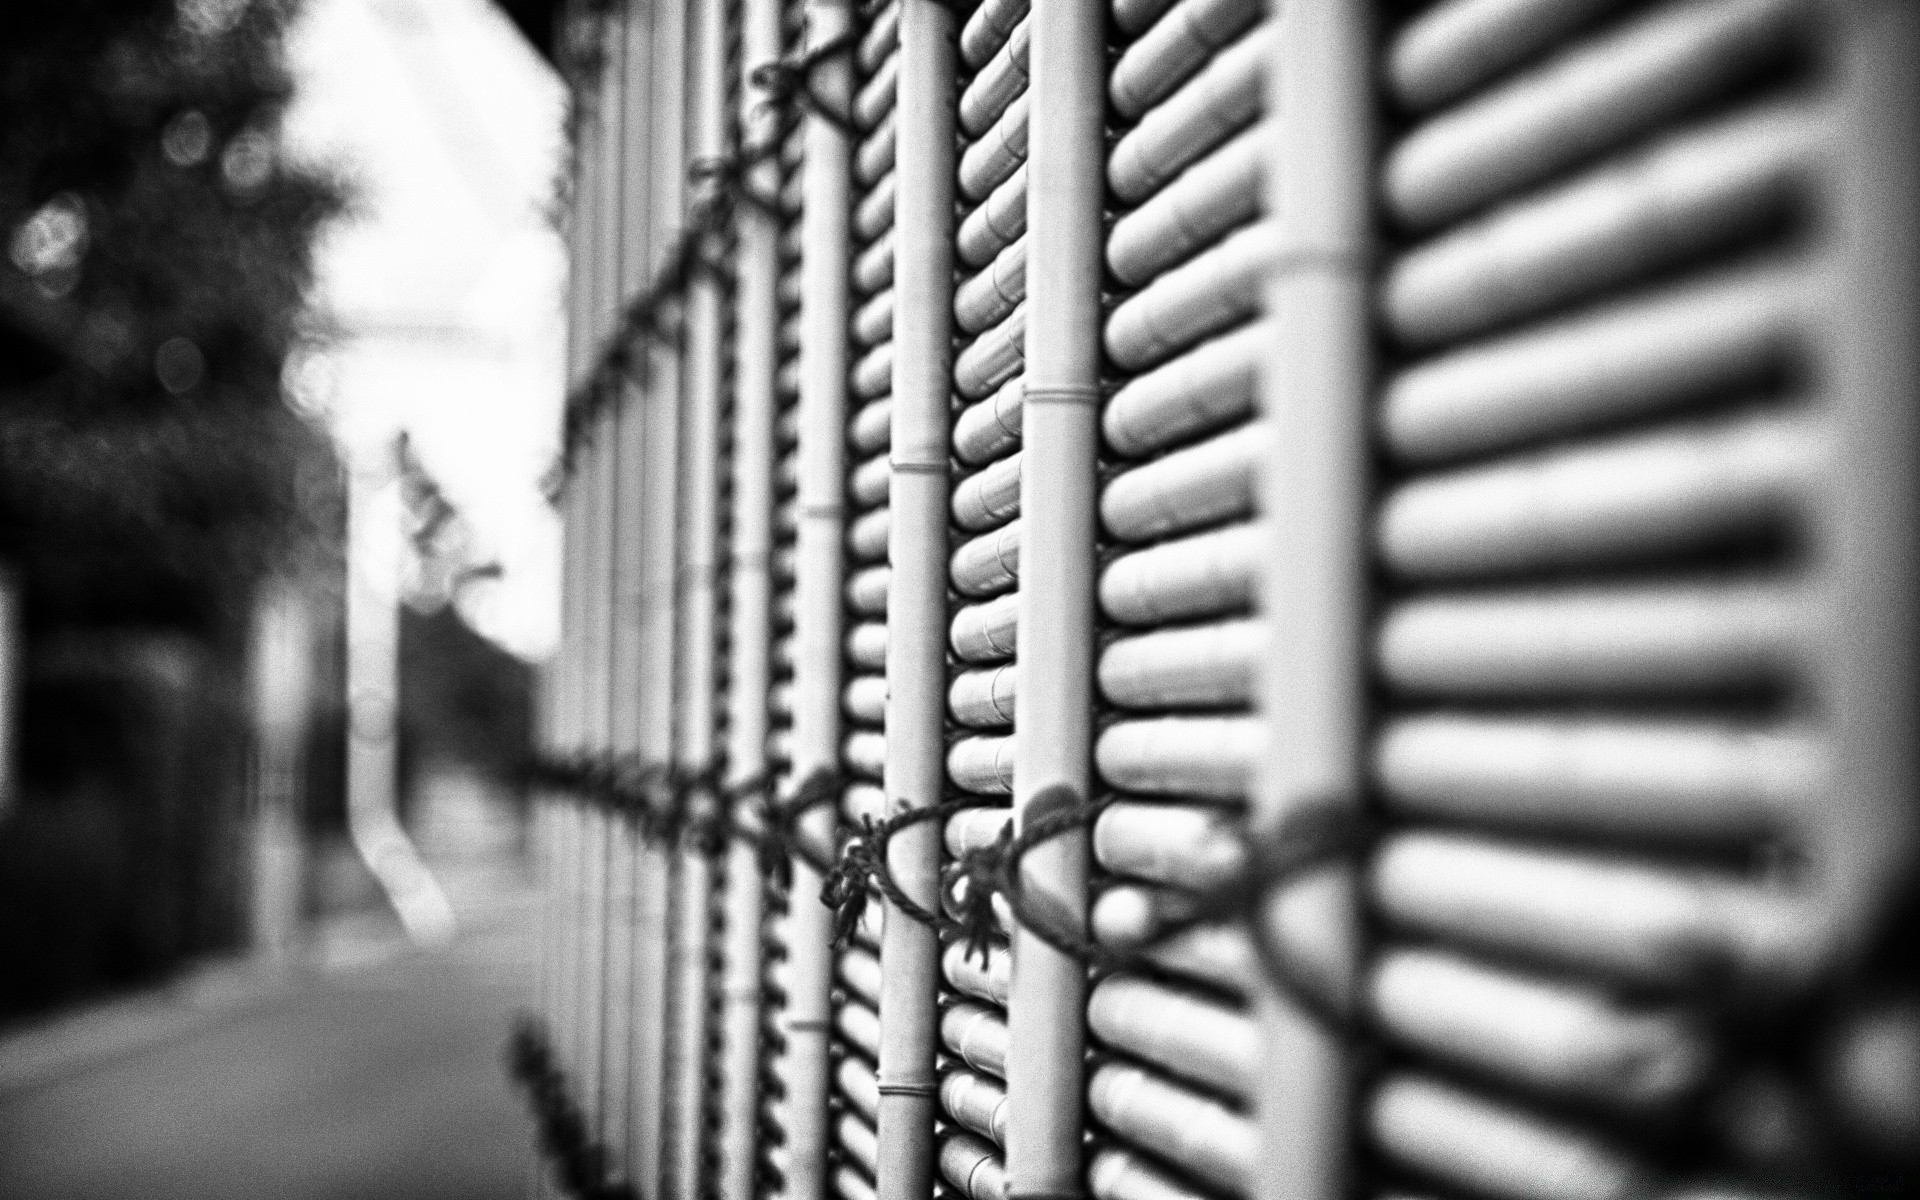 black and white architecture city street outdoors security urban building window wire monochrome business old travel fence glass